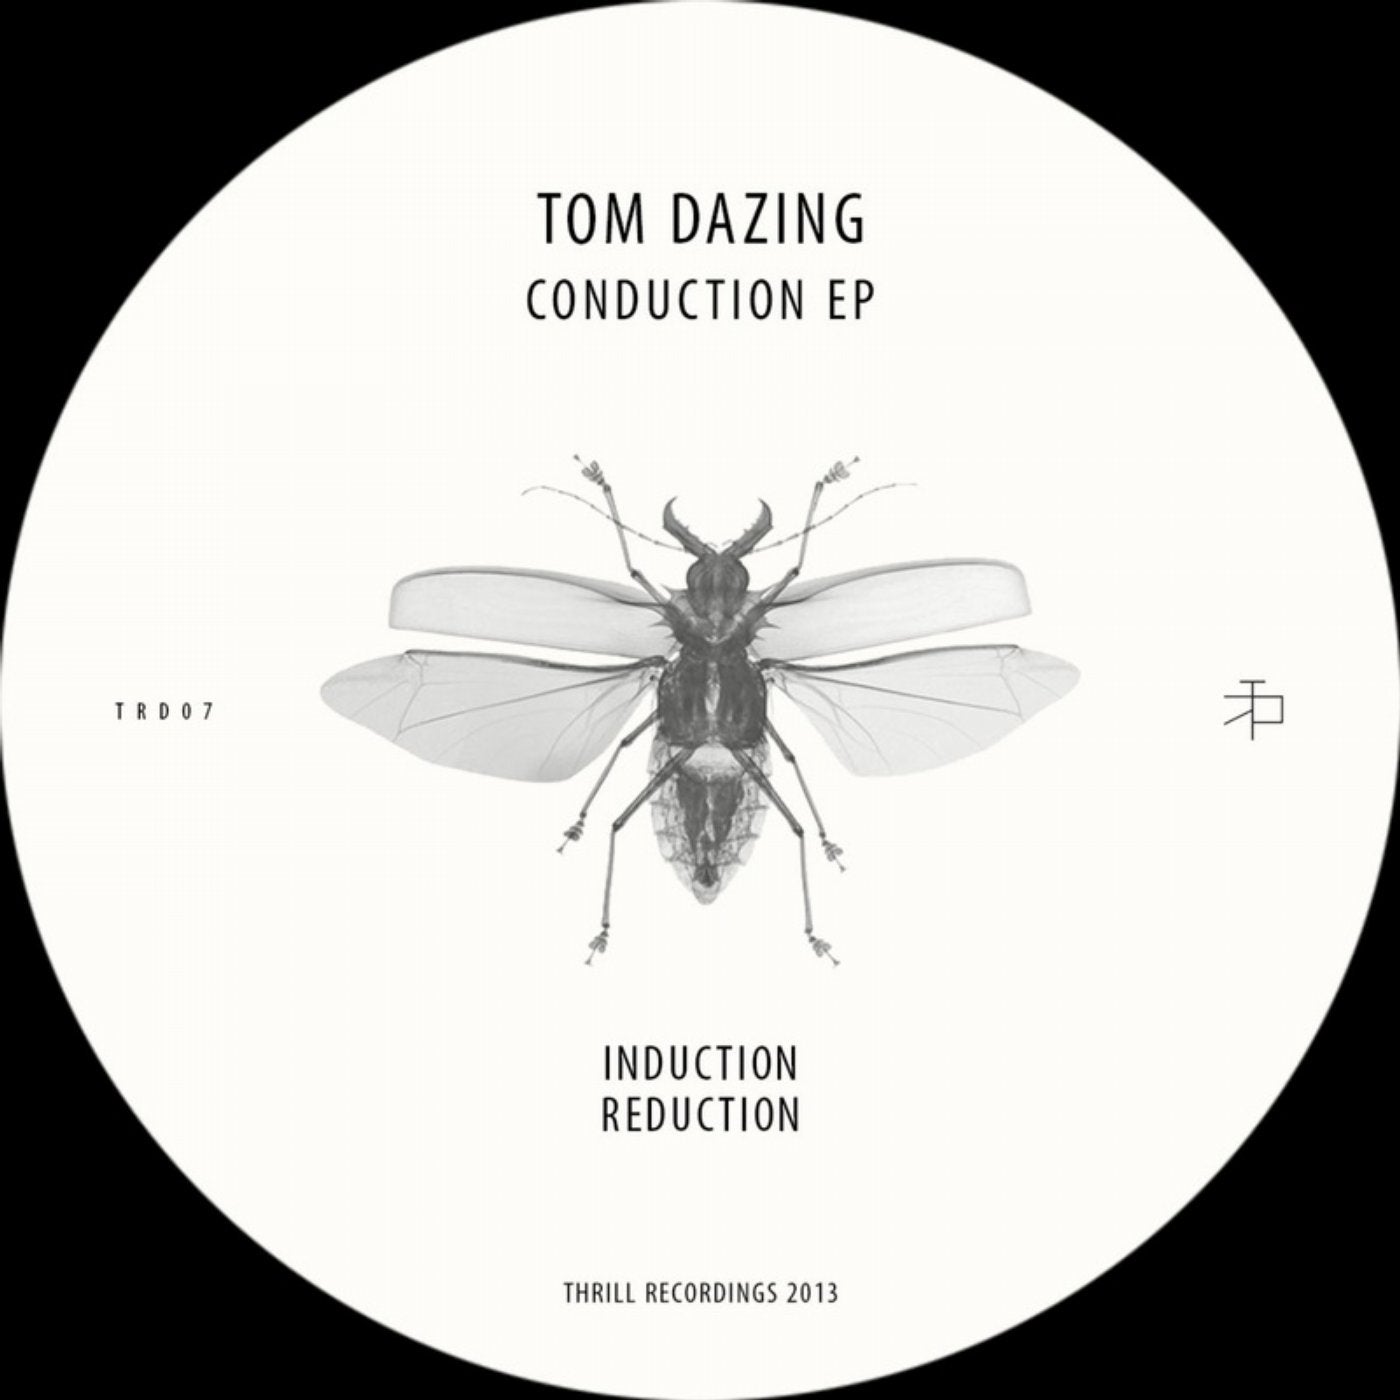 Conduction EP